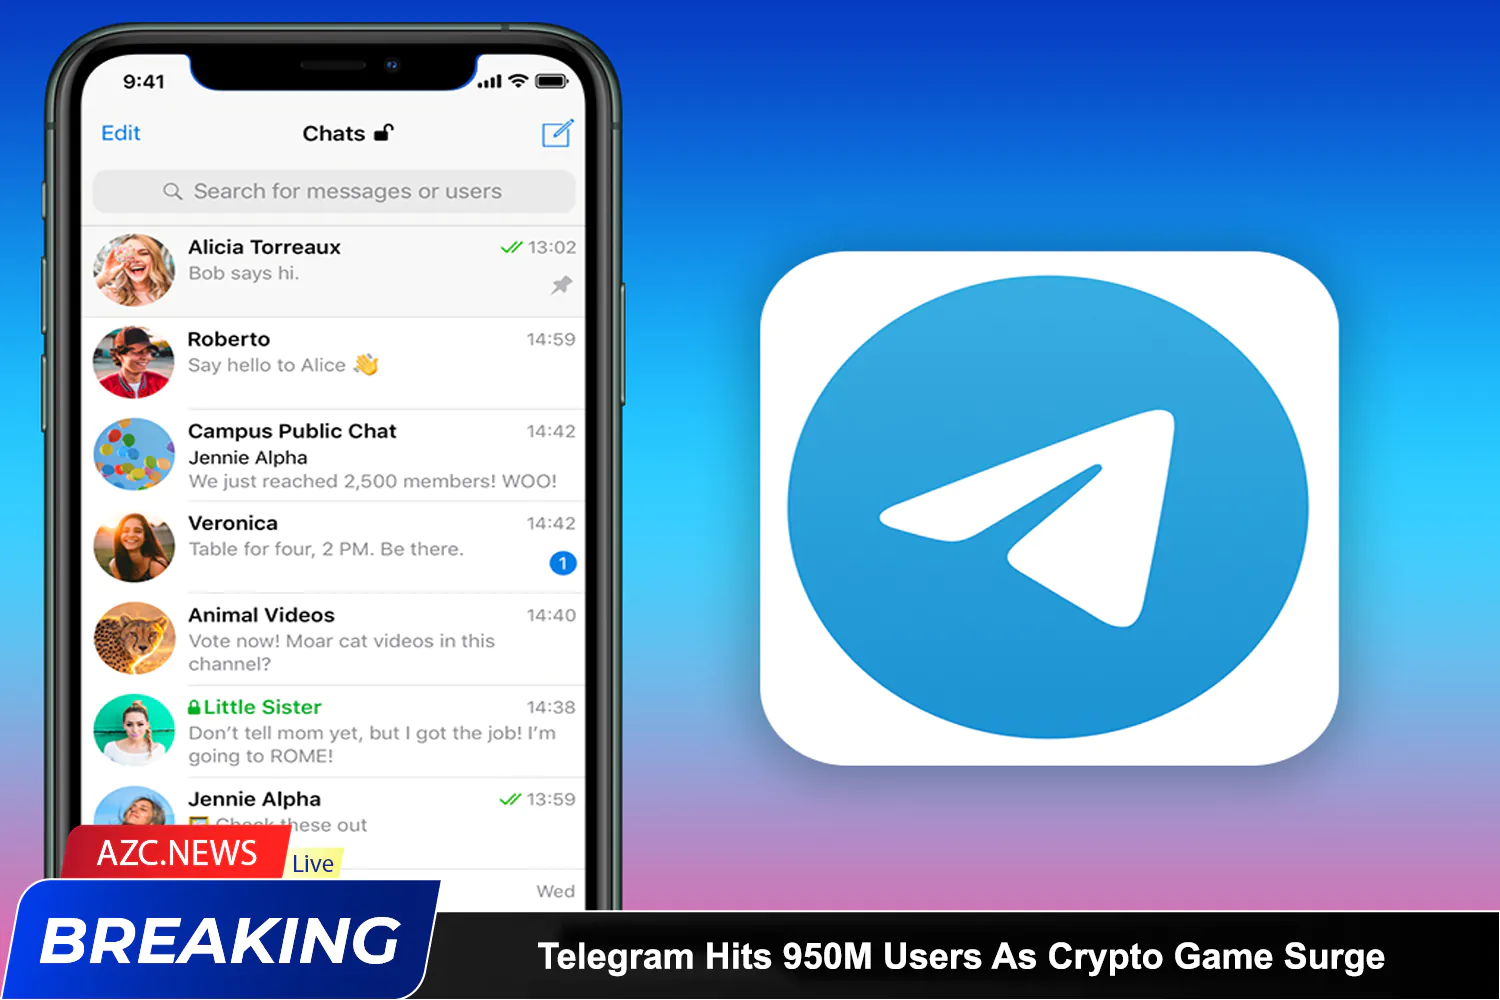 Azcnews Telegram Hits 950m Users As Crypto Game Surge